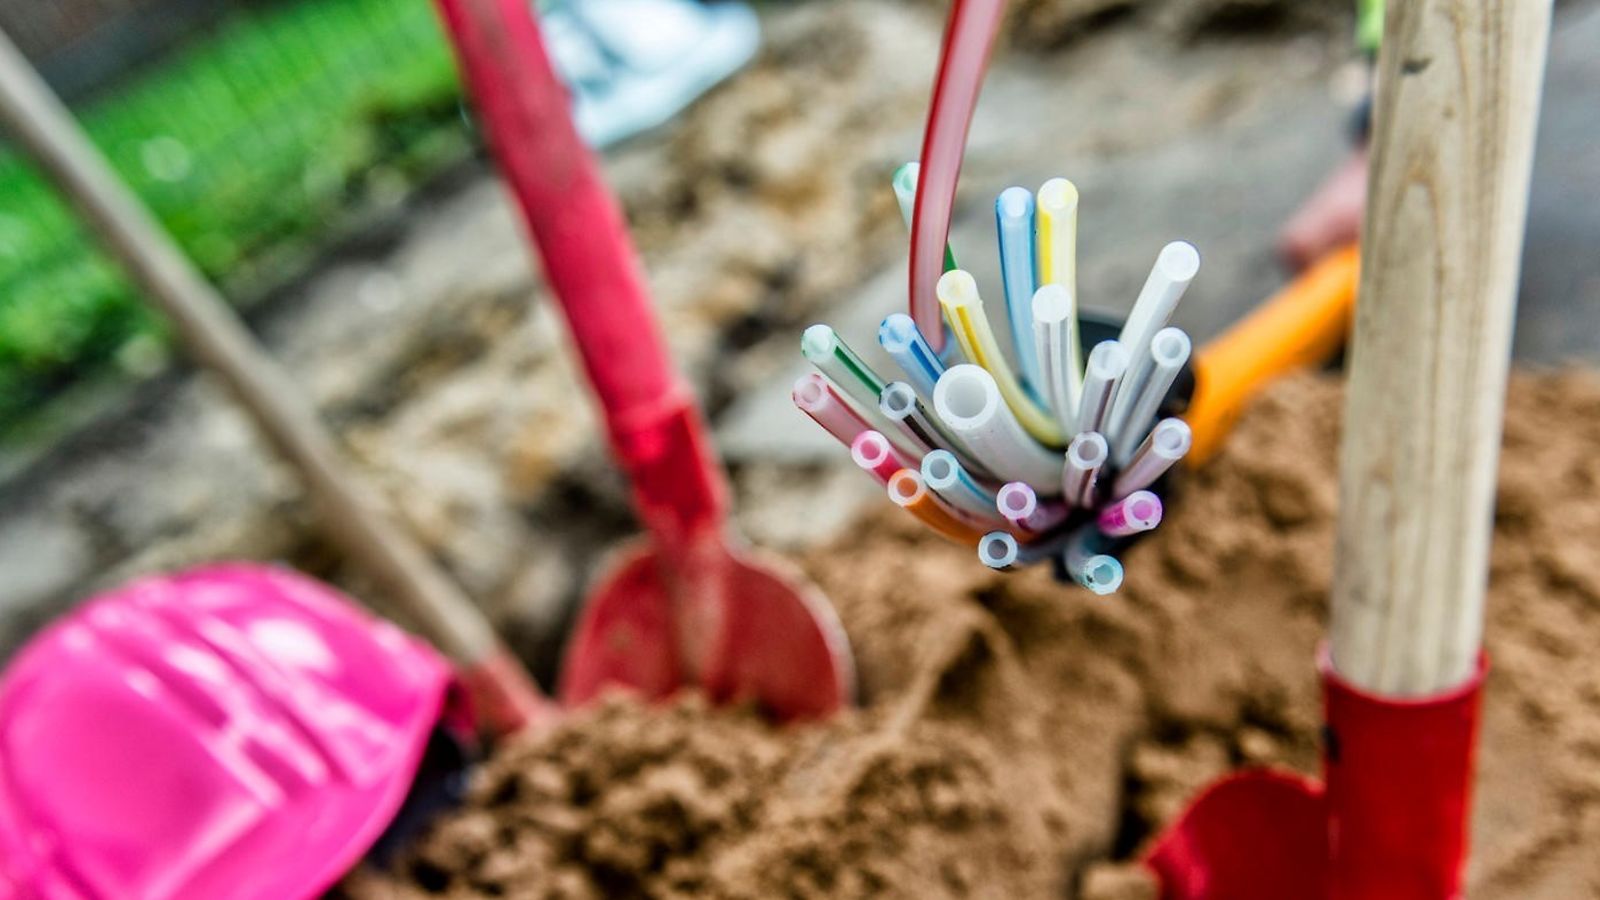 Fiber optic cables protrude from the ground, shovels and a helmet can be seen next to them